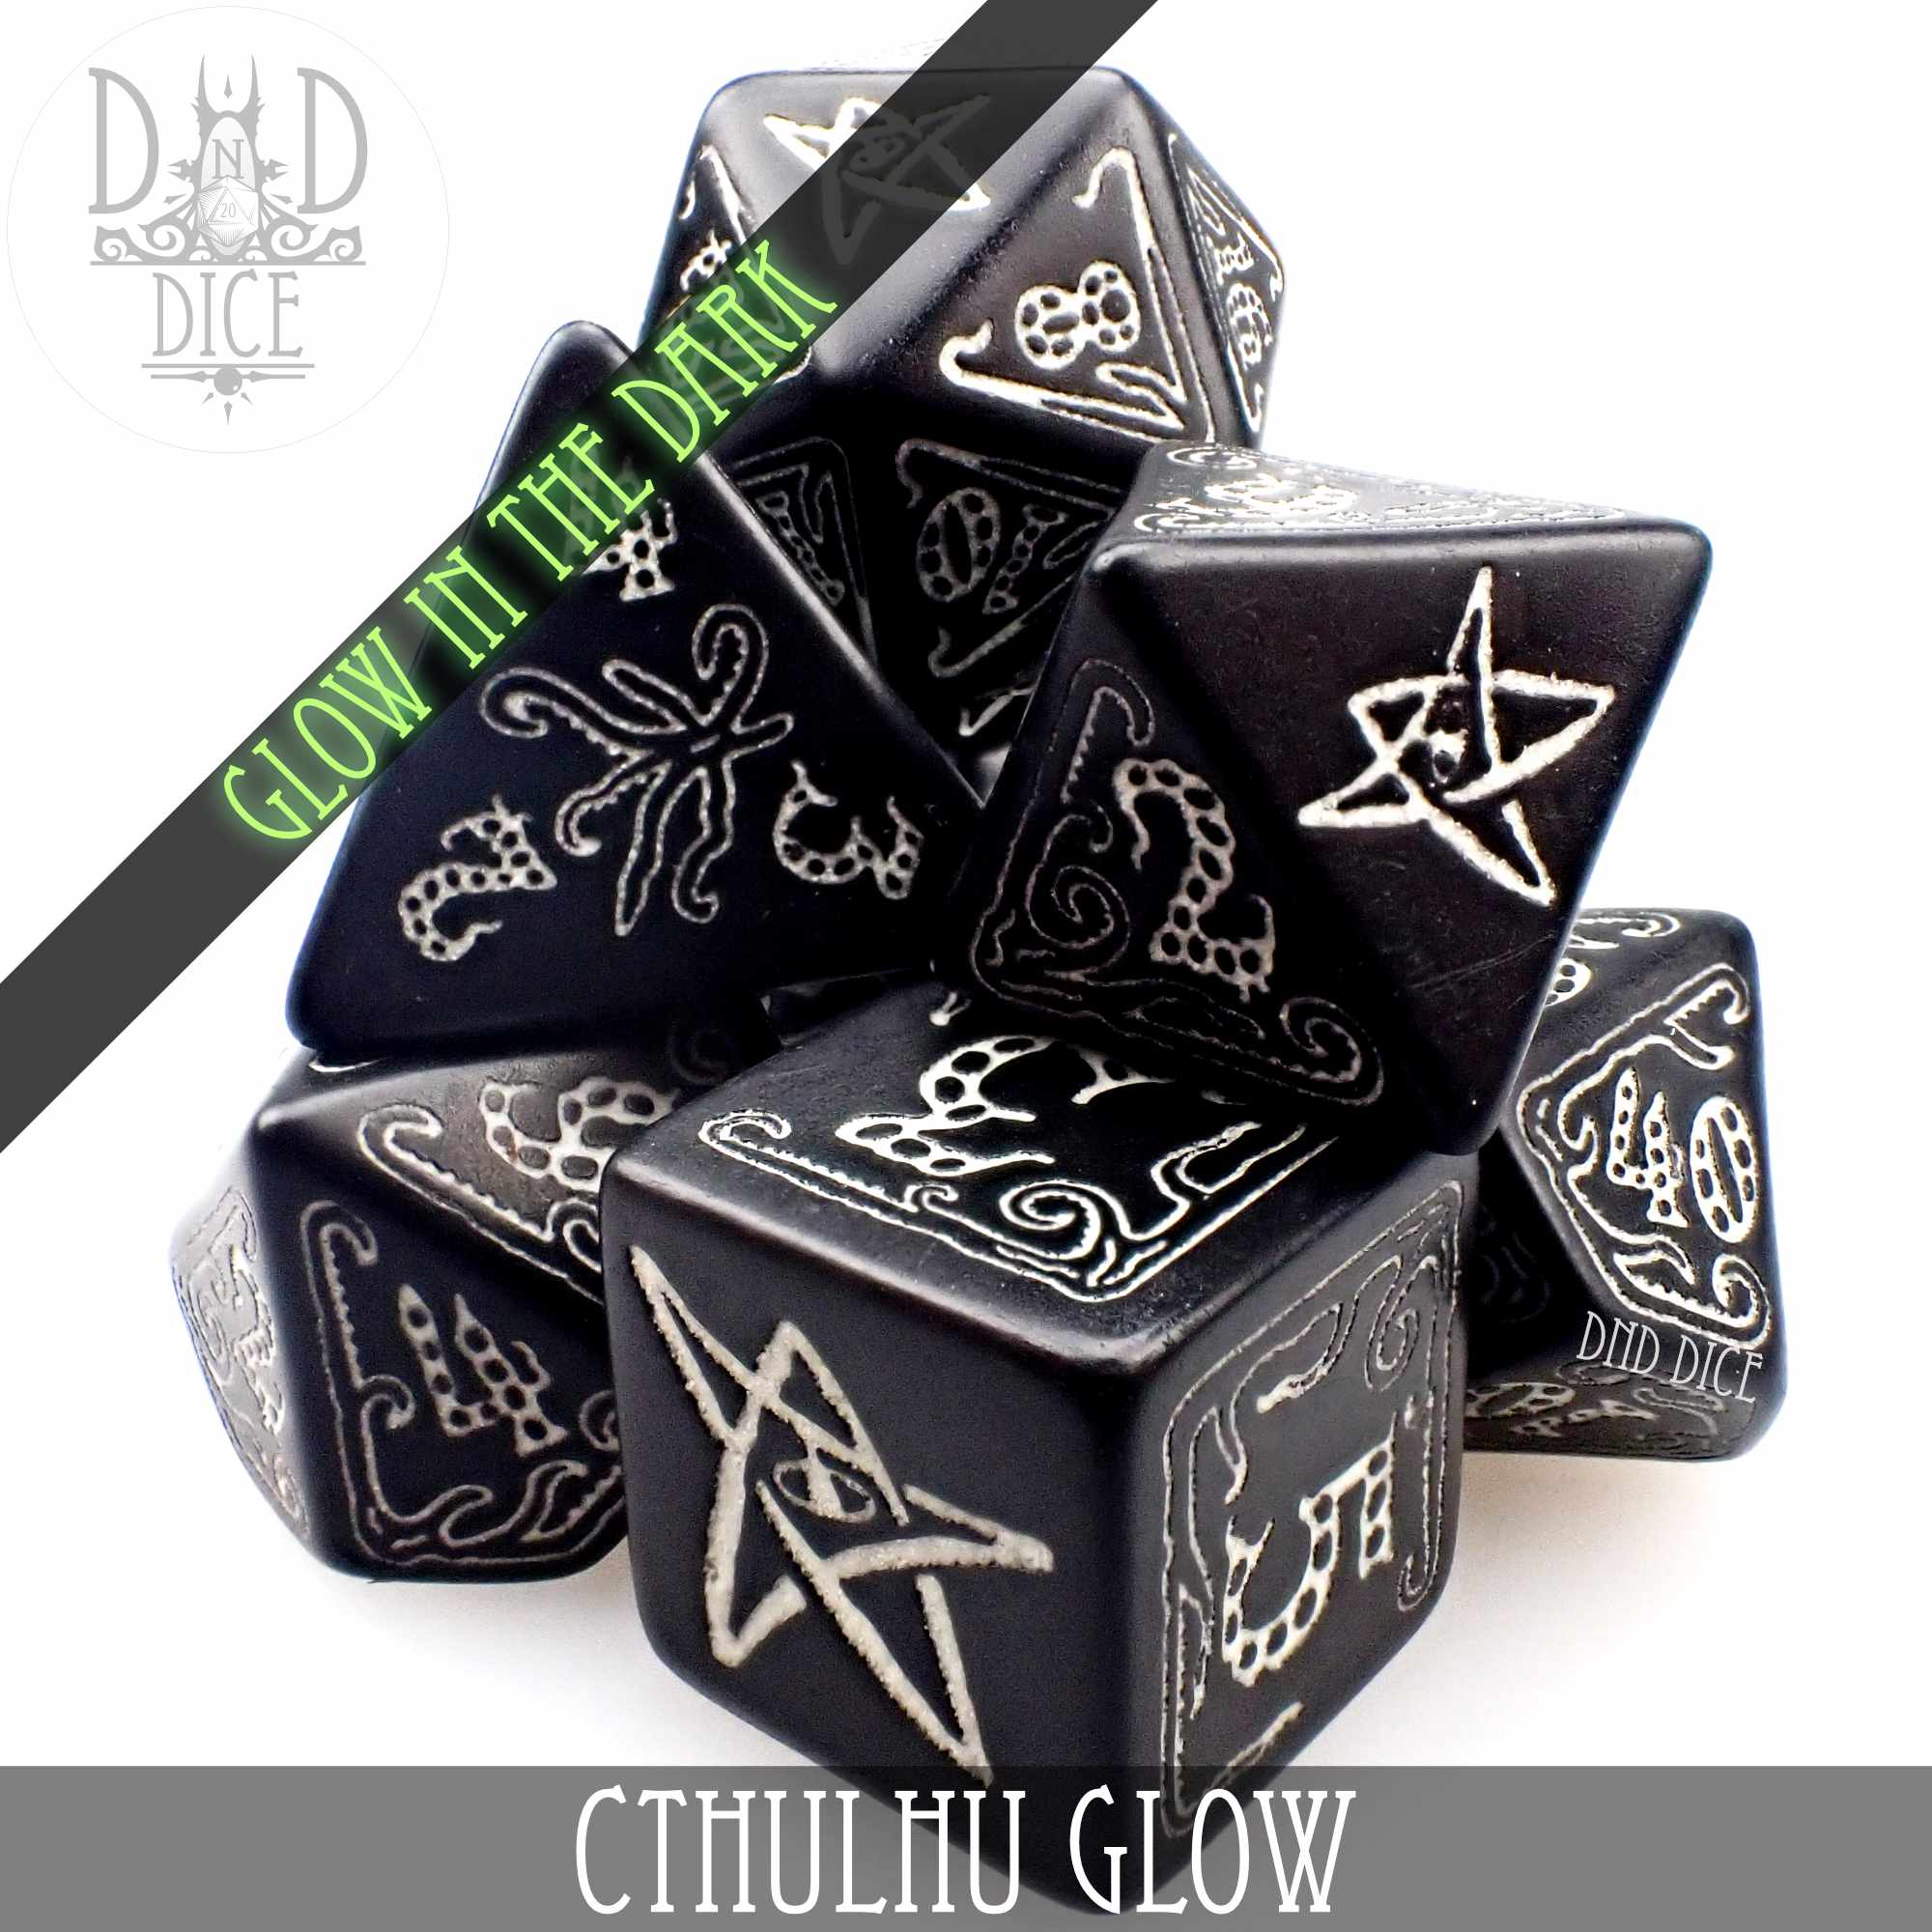 Call of Cthulhu Glow in the Dark Dice Set